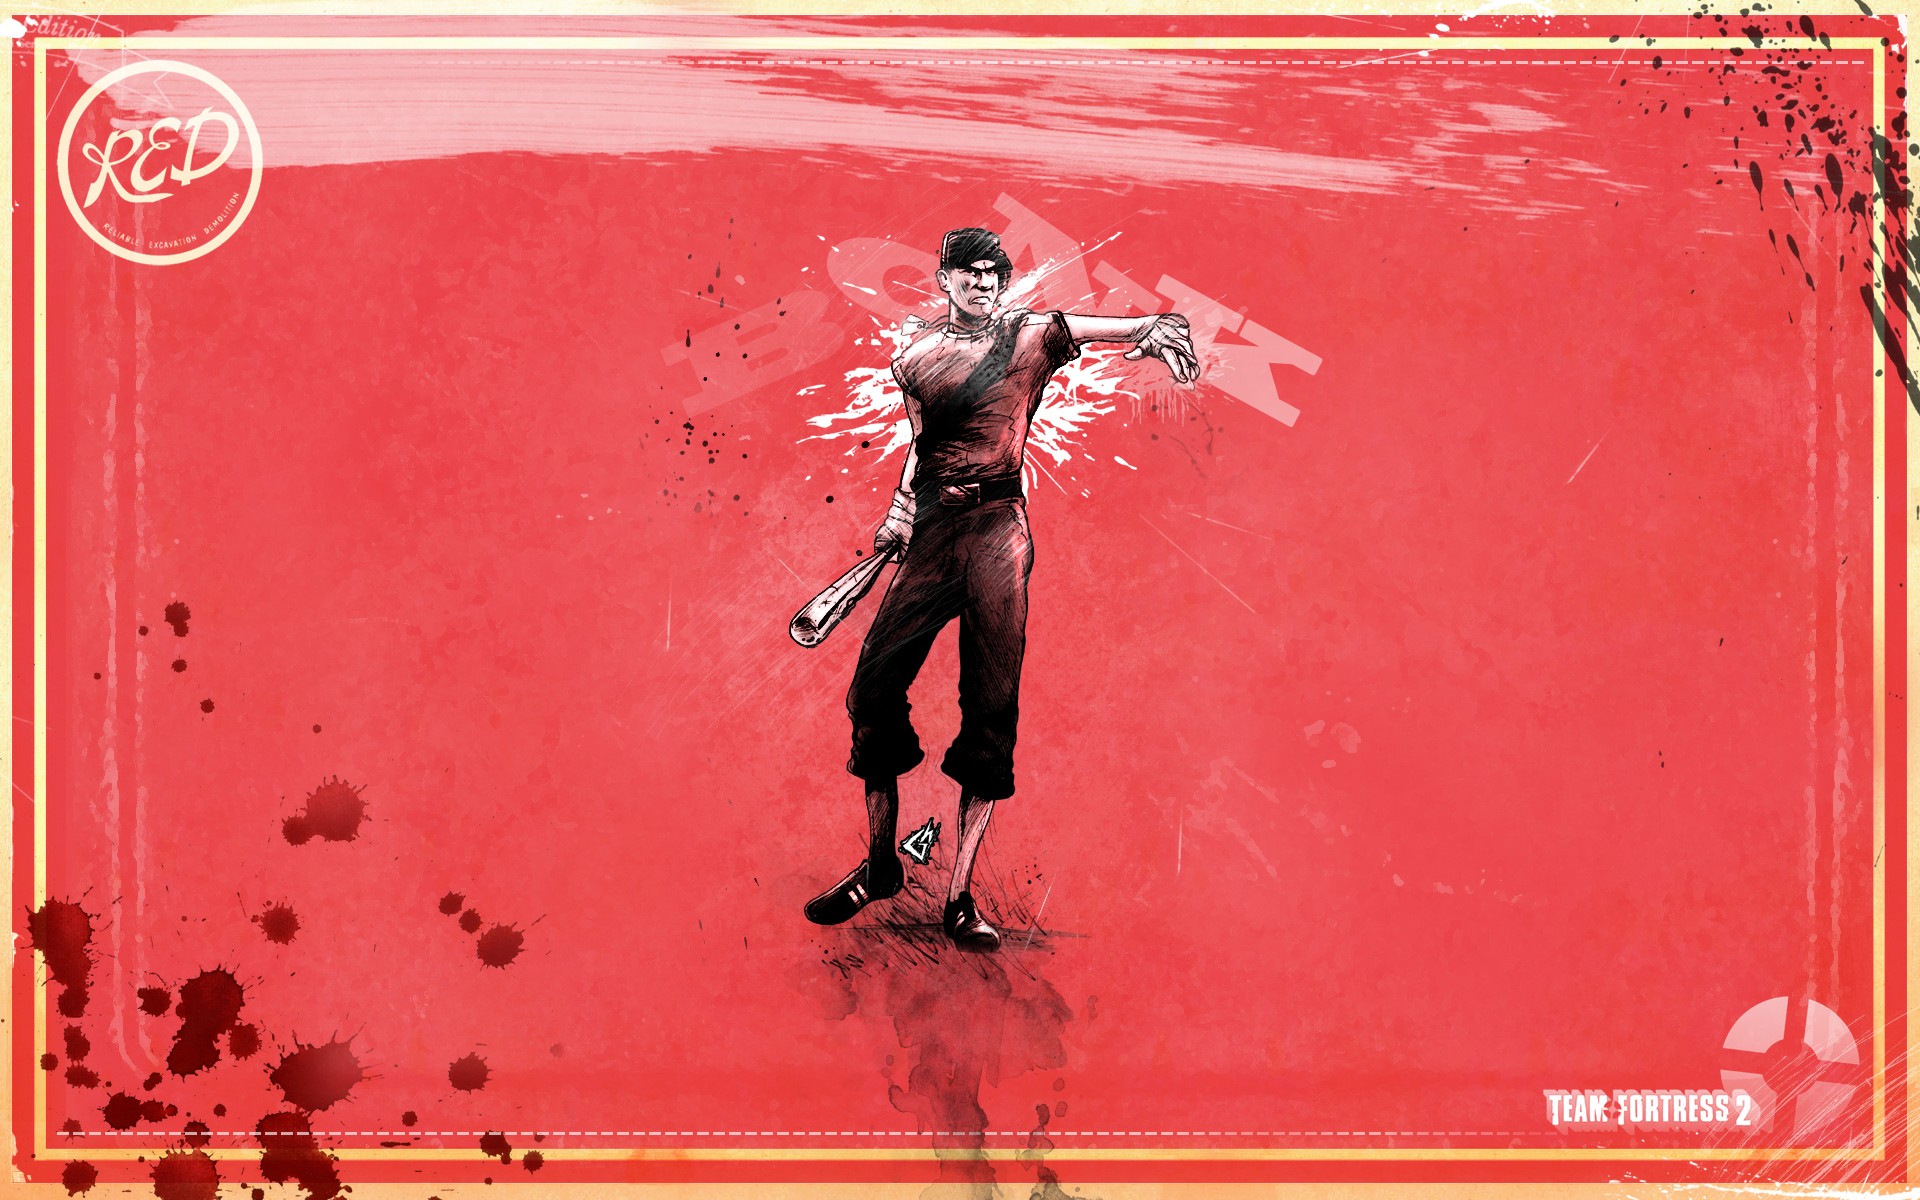 General 1920x1200 Team Fortress 2 baseball bat red background PC gaming video game art